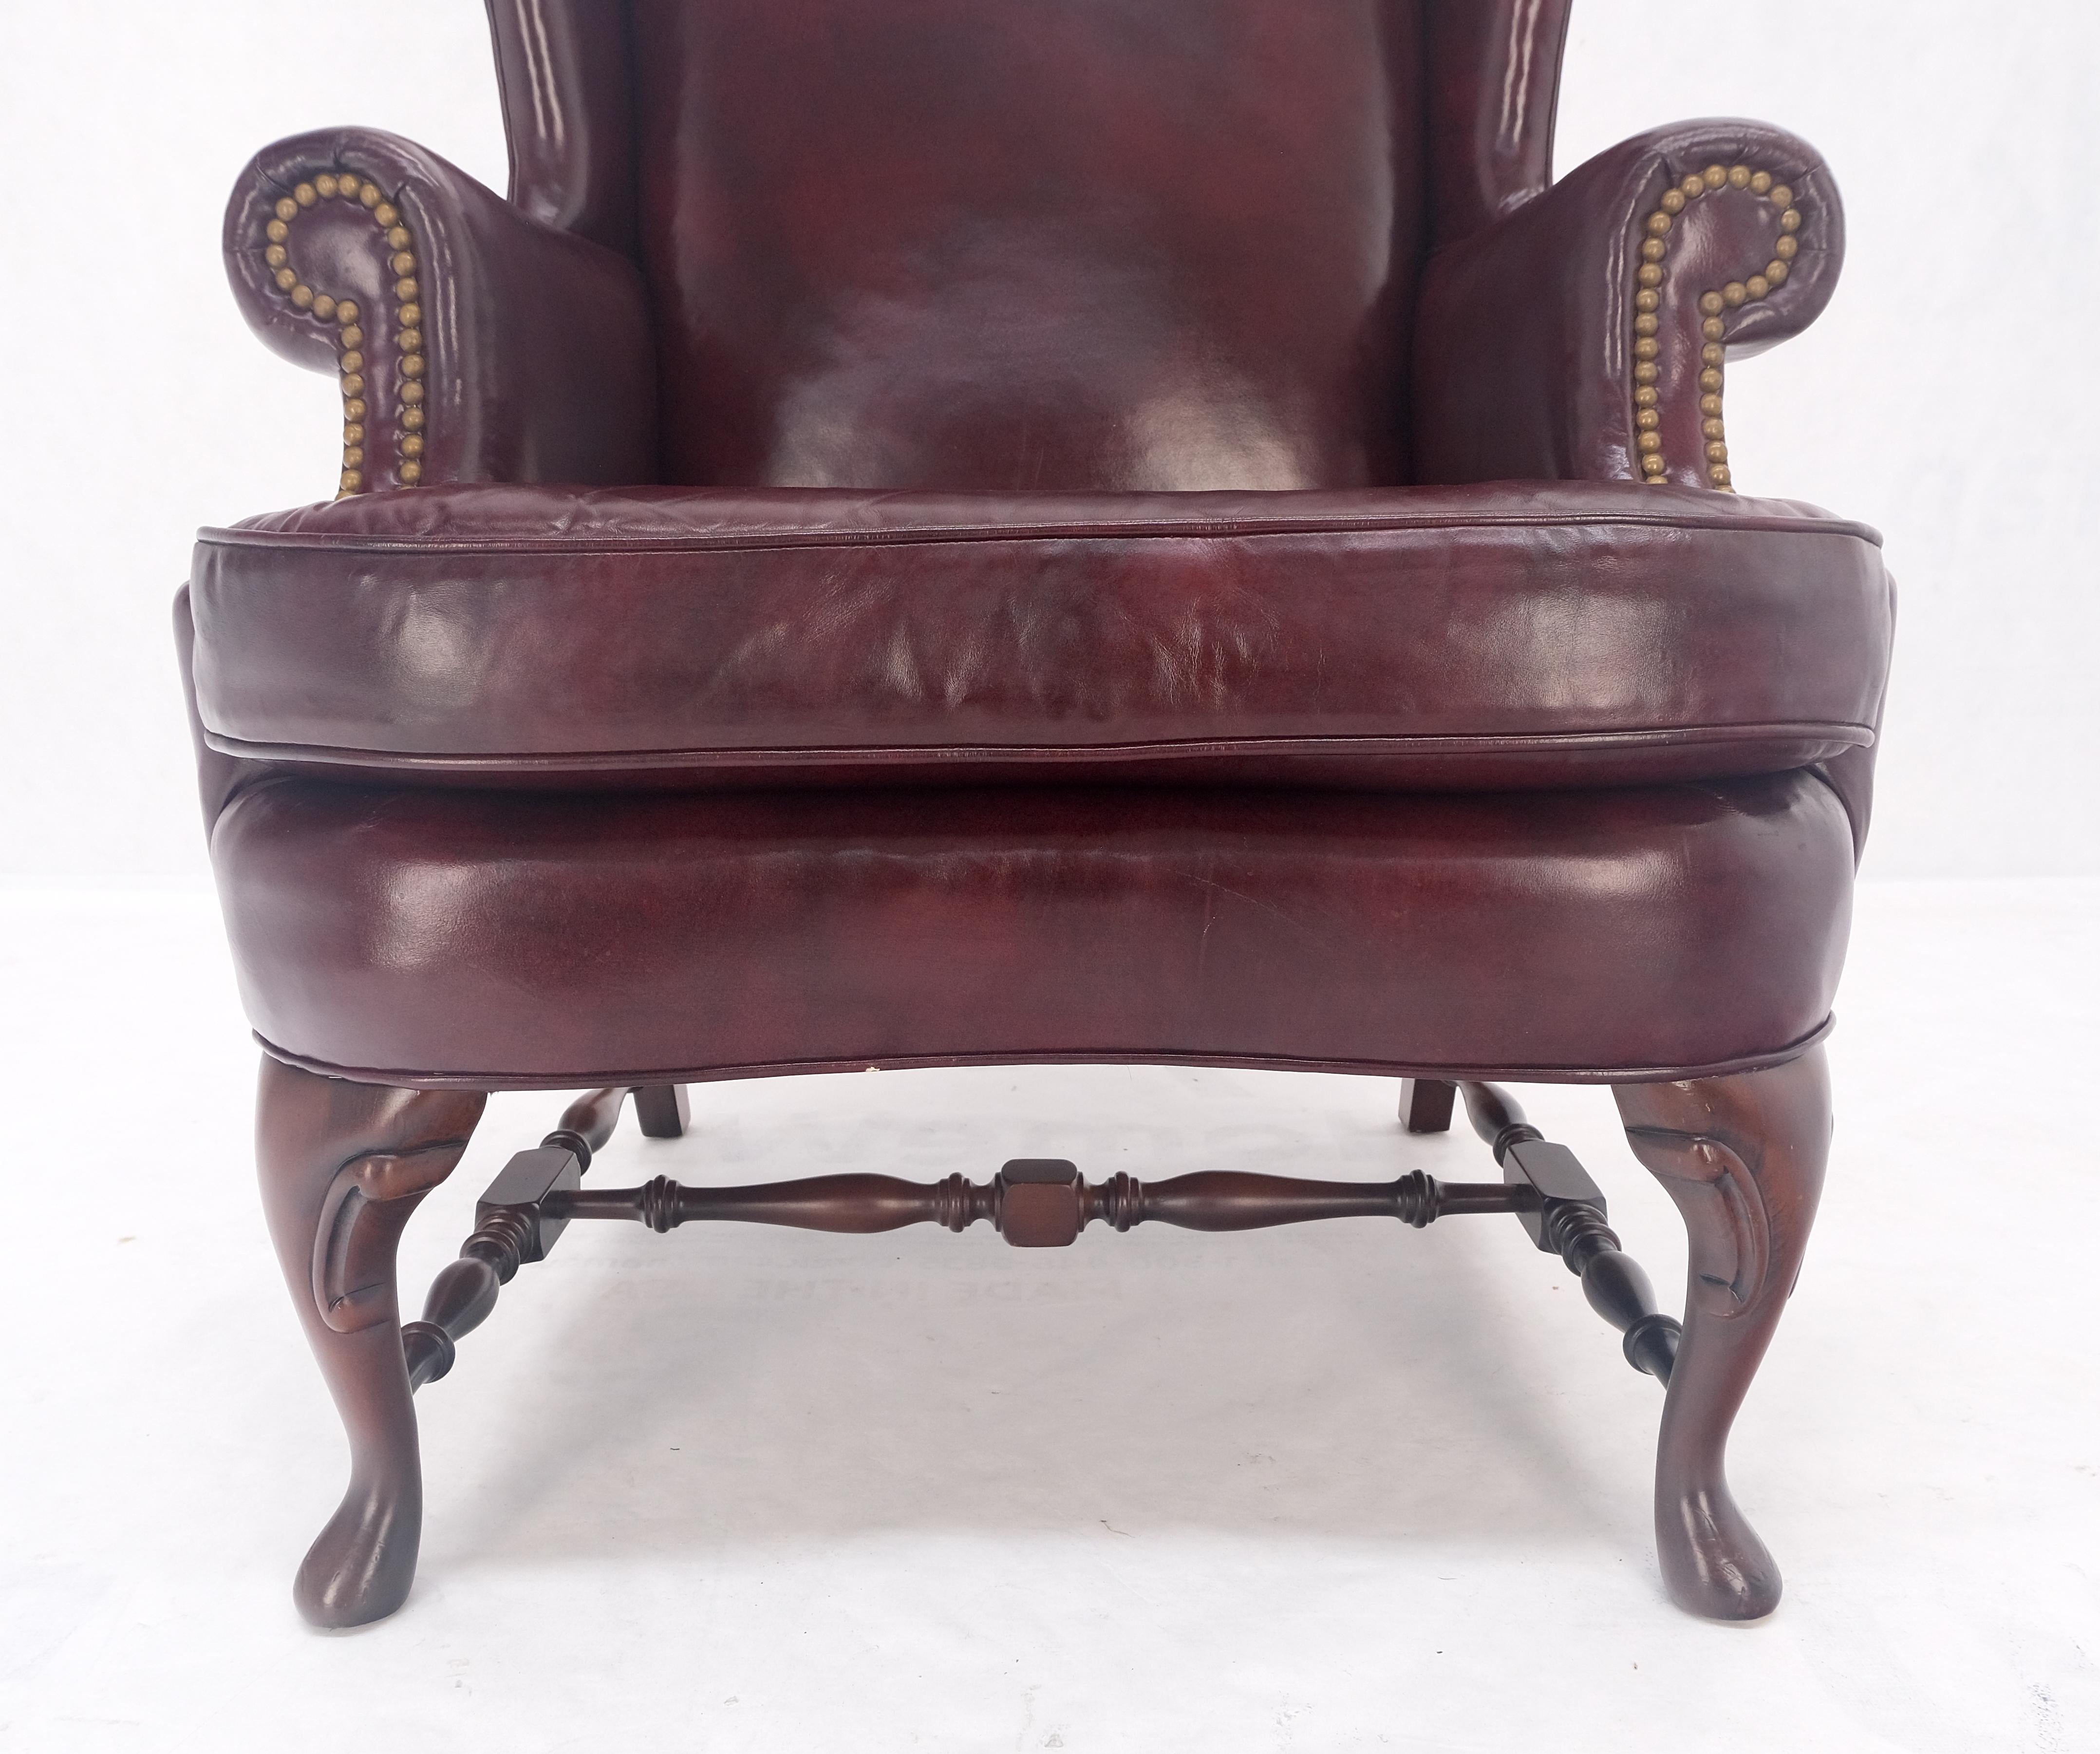 American Kindel Burgundy Leather Upholstery Carved Mahogany Legs Wingback Chair & Ottoman For Sale